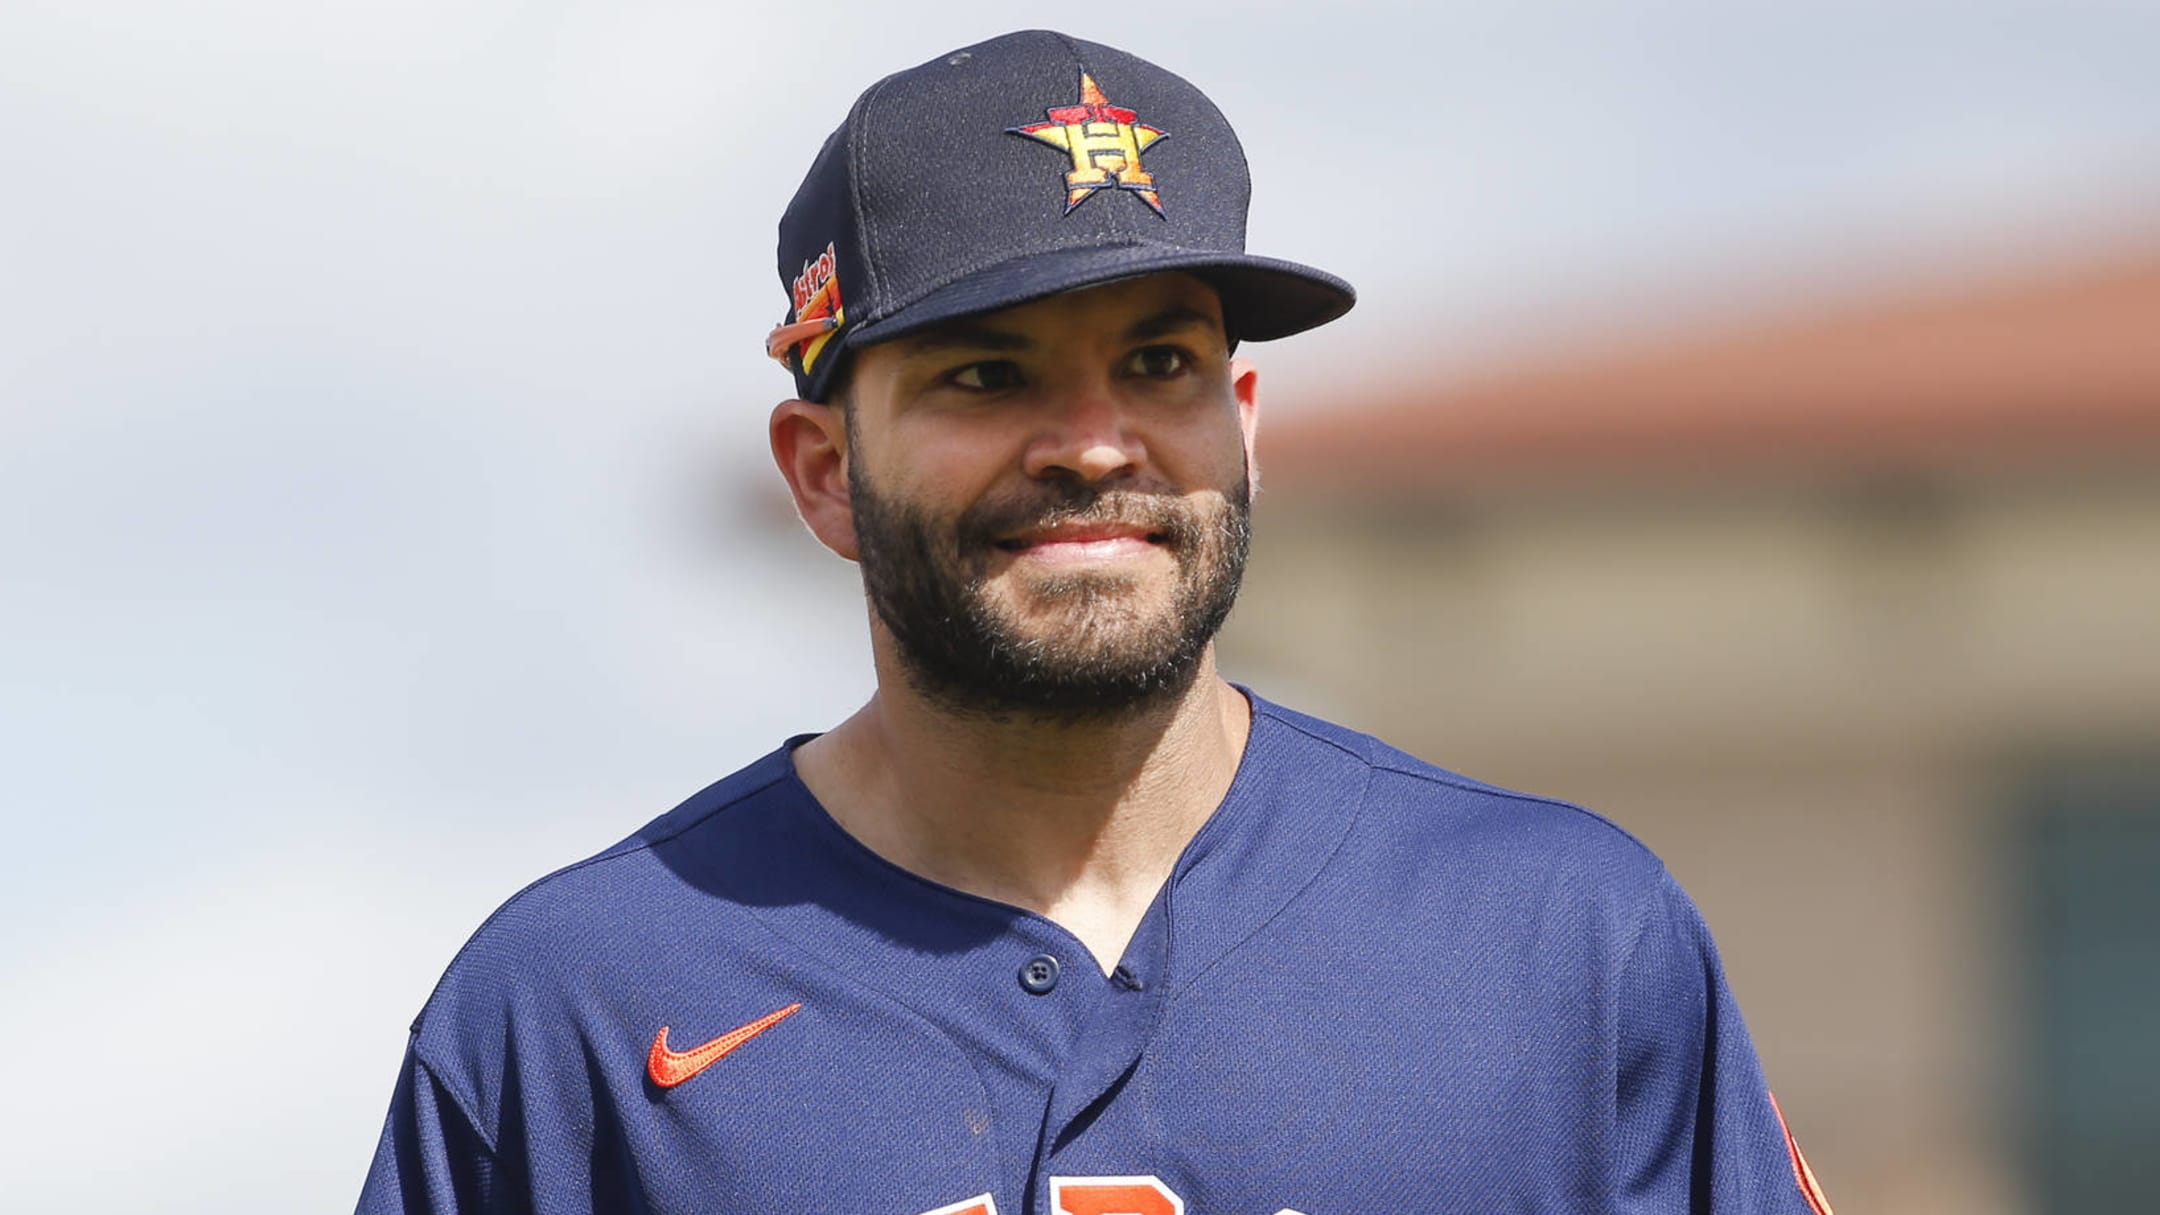 Jose Altuve heckled with tattoo taunts while signing autographs